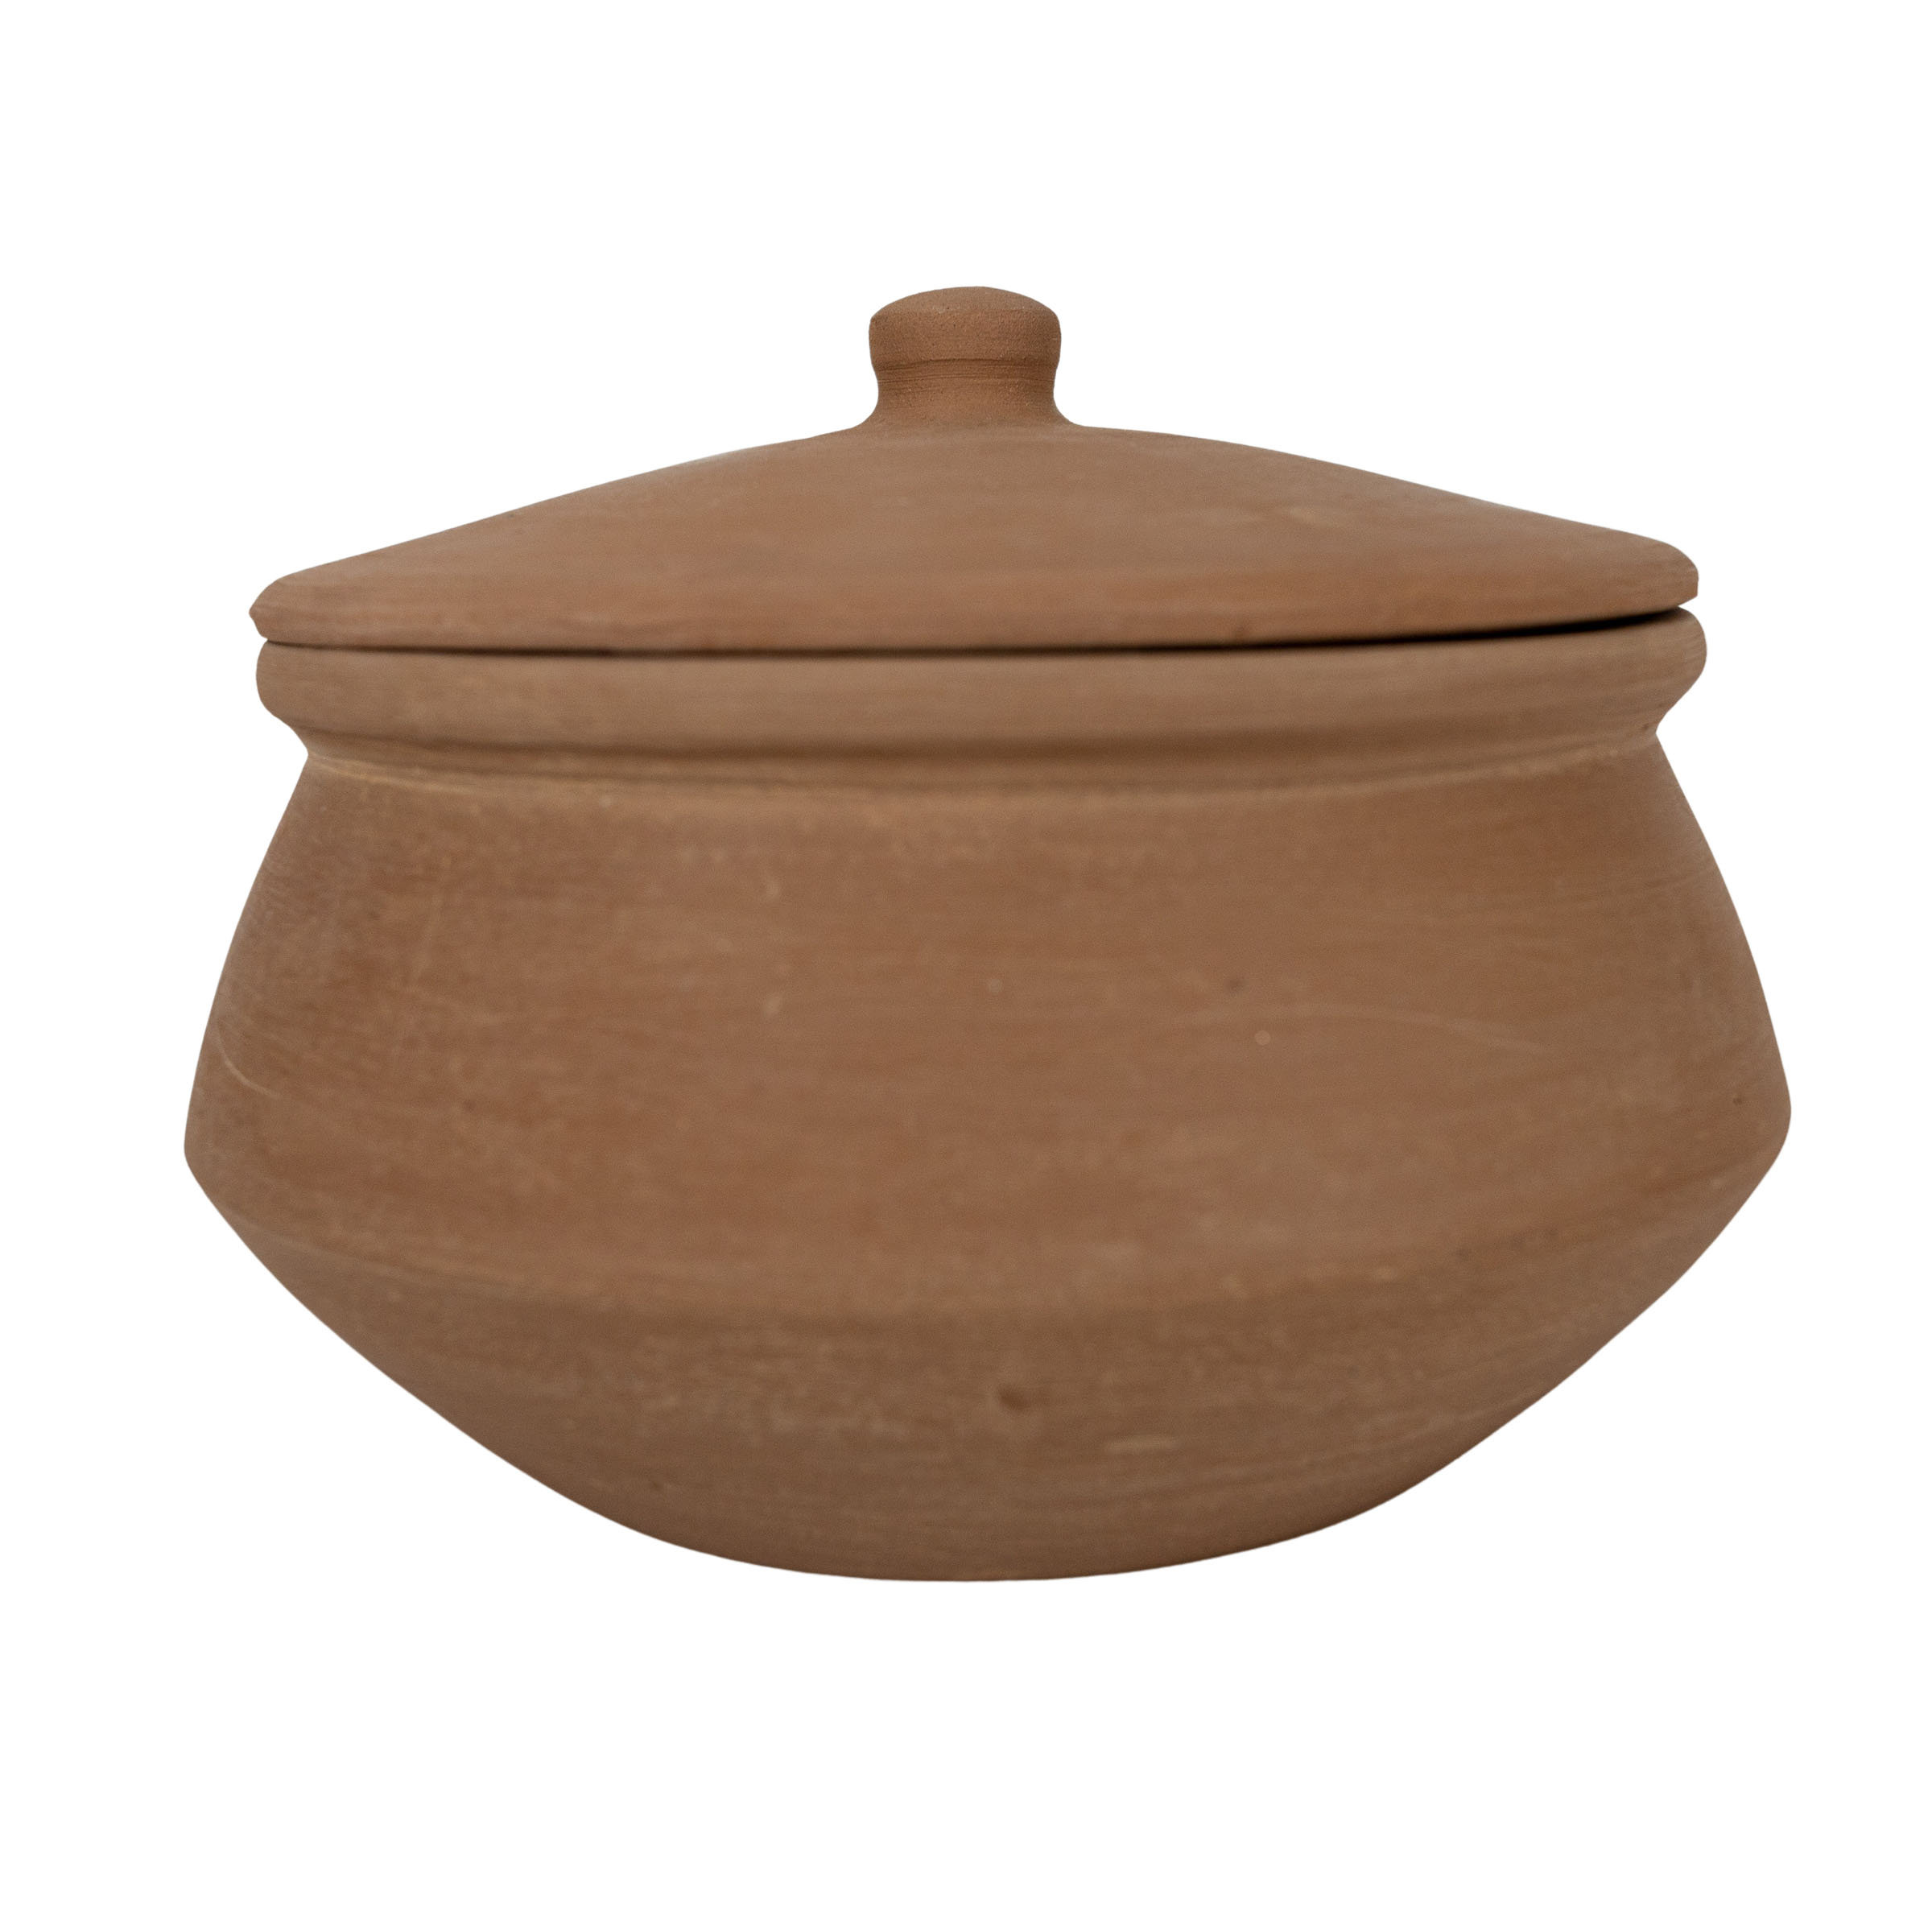 2.6 Quart Pottery Cooking Pot with Lid, Round & Deep Design